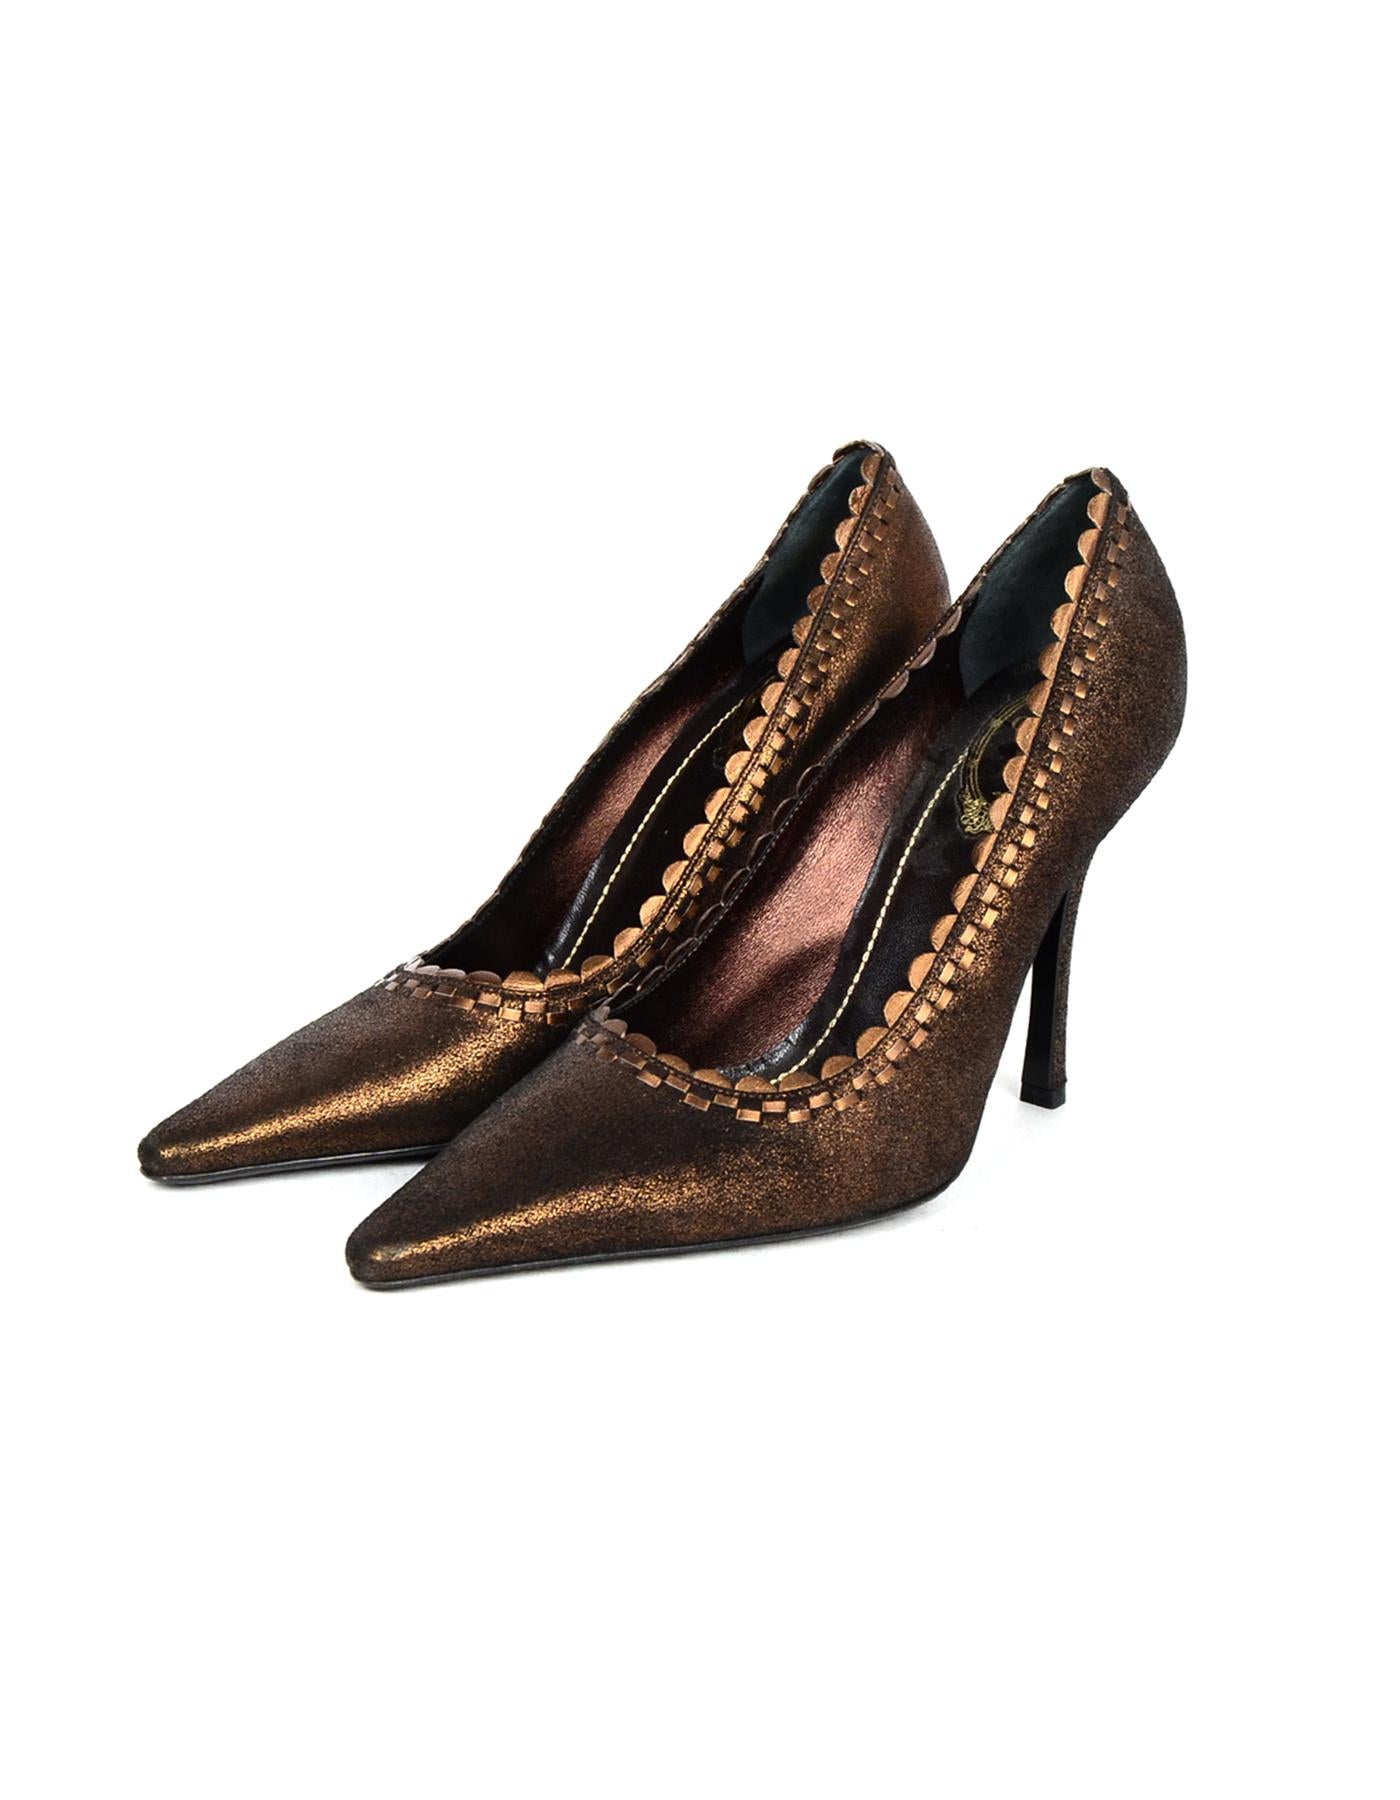 Rene Caovilla Bronze Leather Point Toe Pumps W/ Scalloped Edge Sz 38

Made In: Italy
Color: Bronze
Materials: Leather
Closure/Opening: Slide on
Overall Condition: Excellent pre-owned condition with excpetion of minor wear on toes and minor